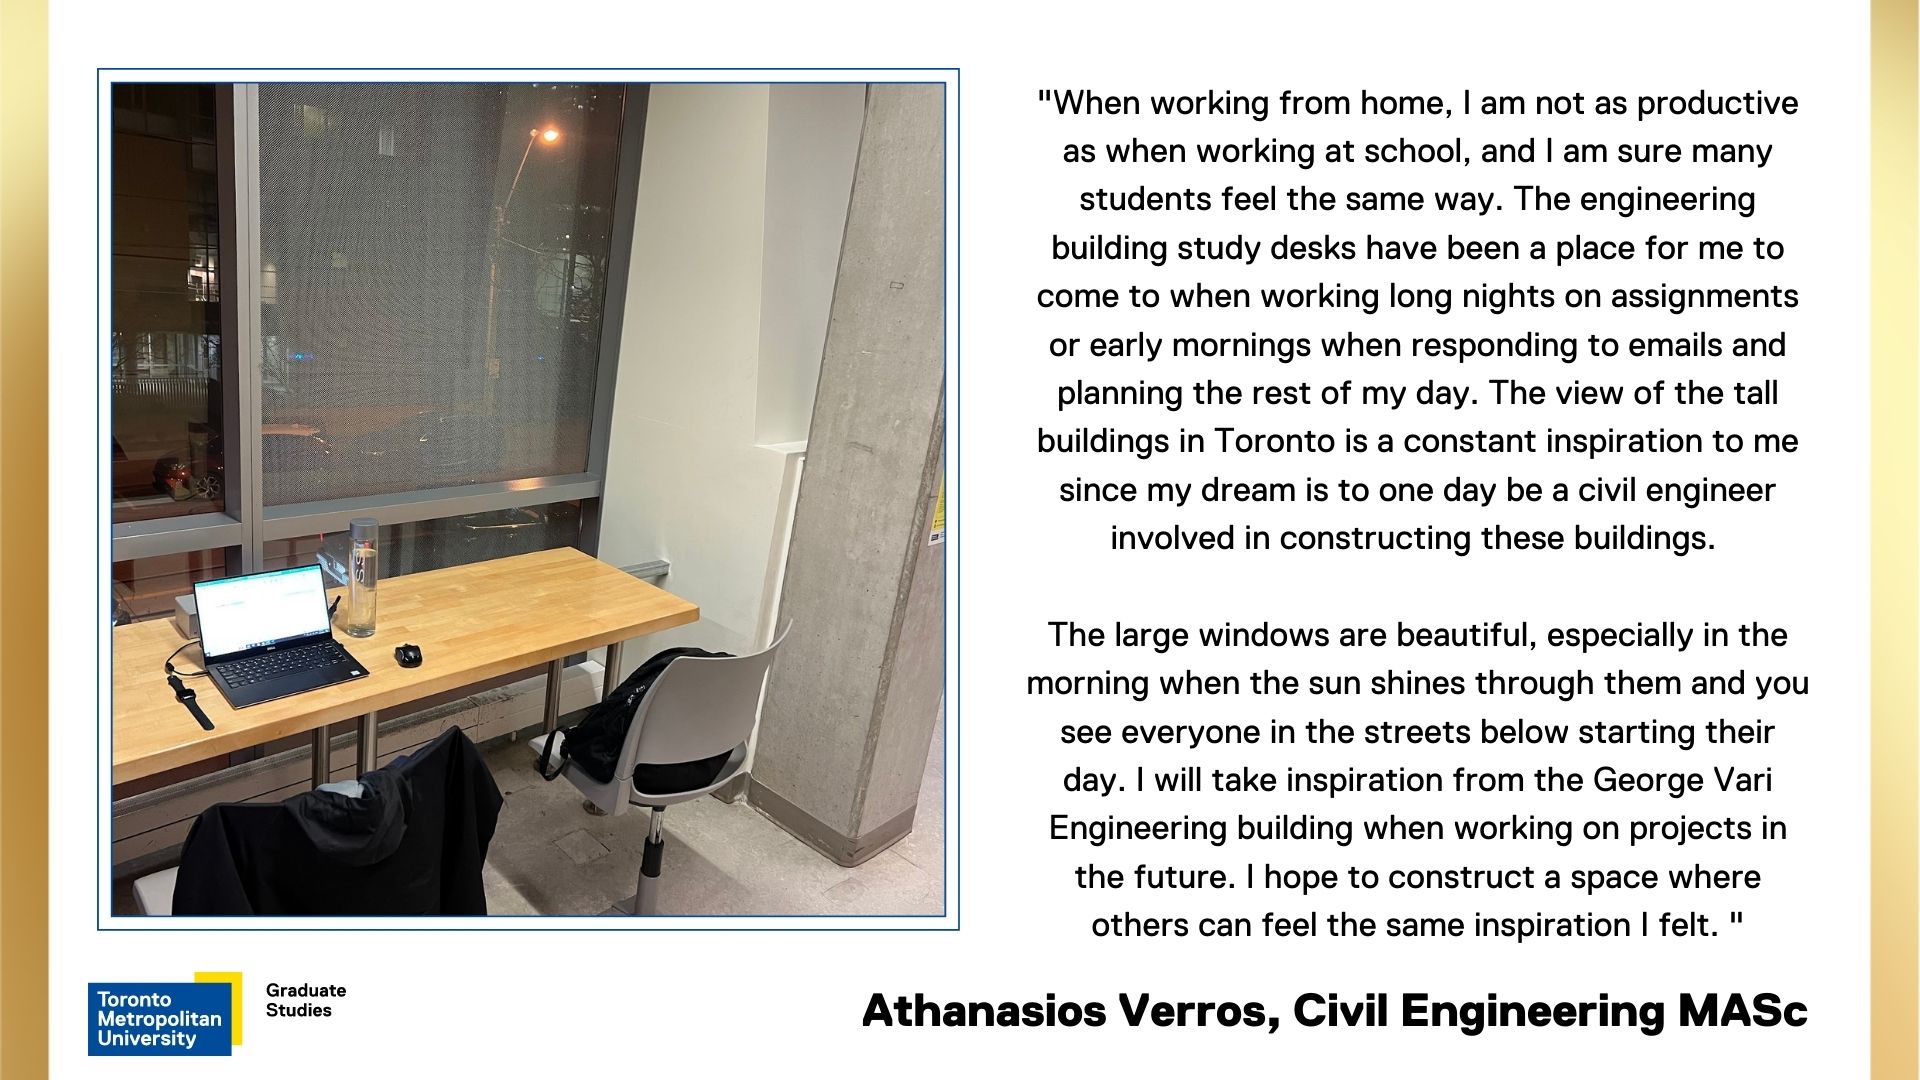 Athanasios-Verros. Laptop set up on table in engineering building at night.